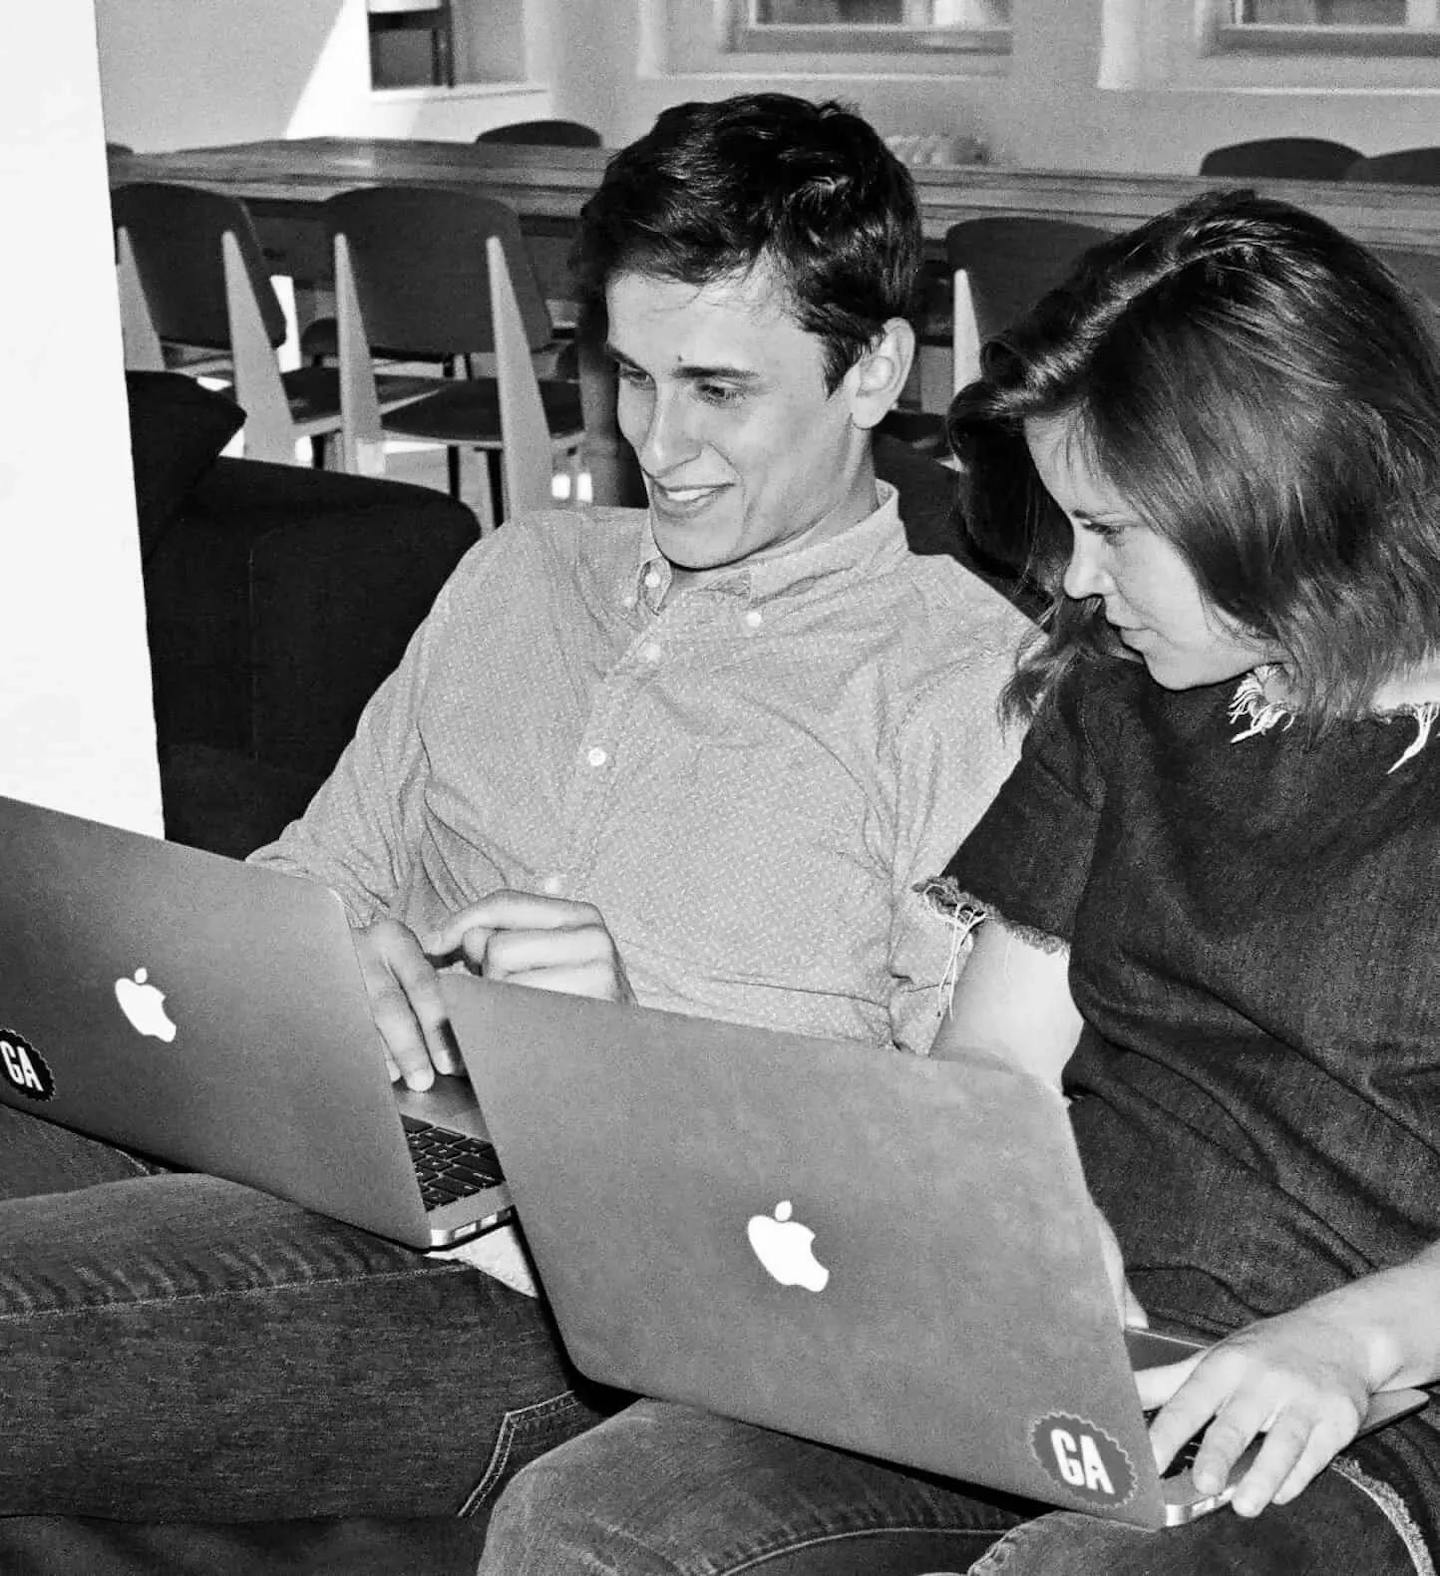 Students in classroom on Apple computers